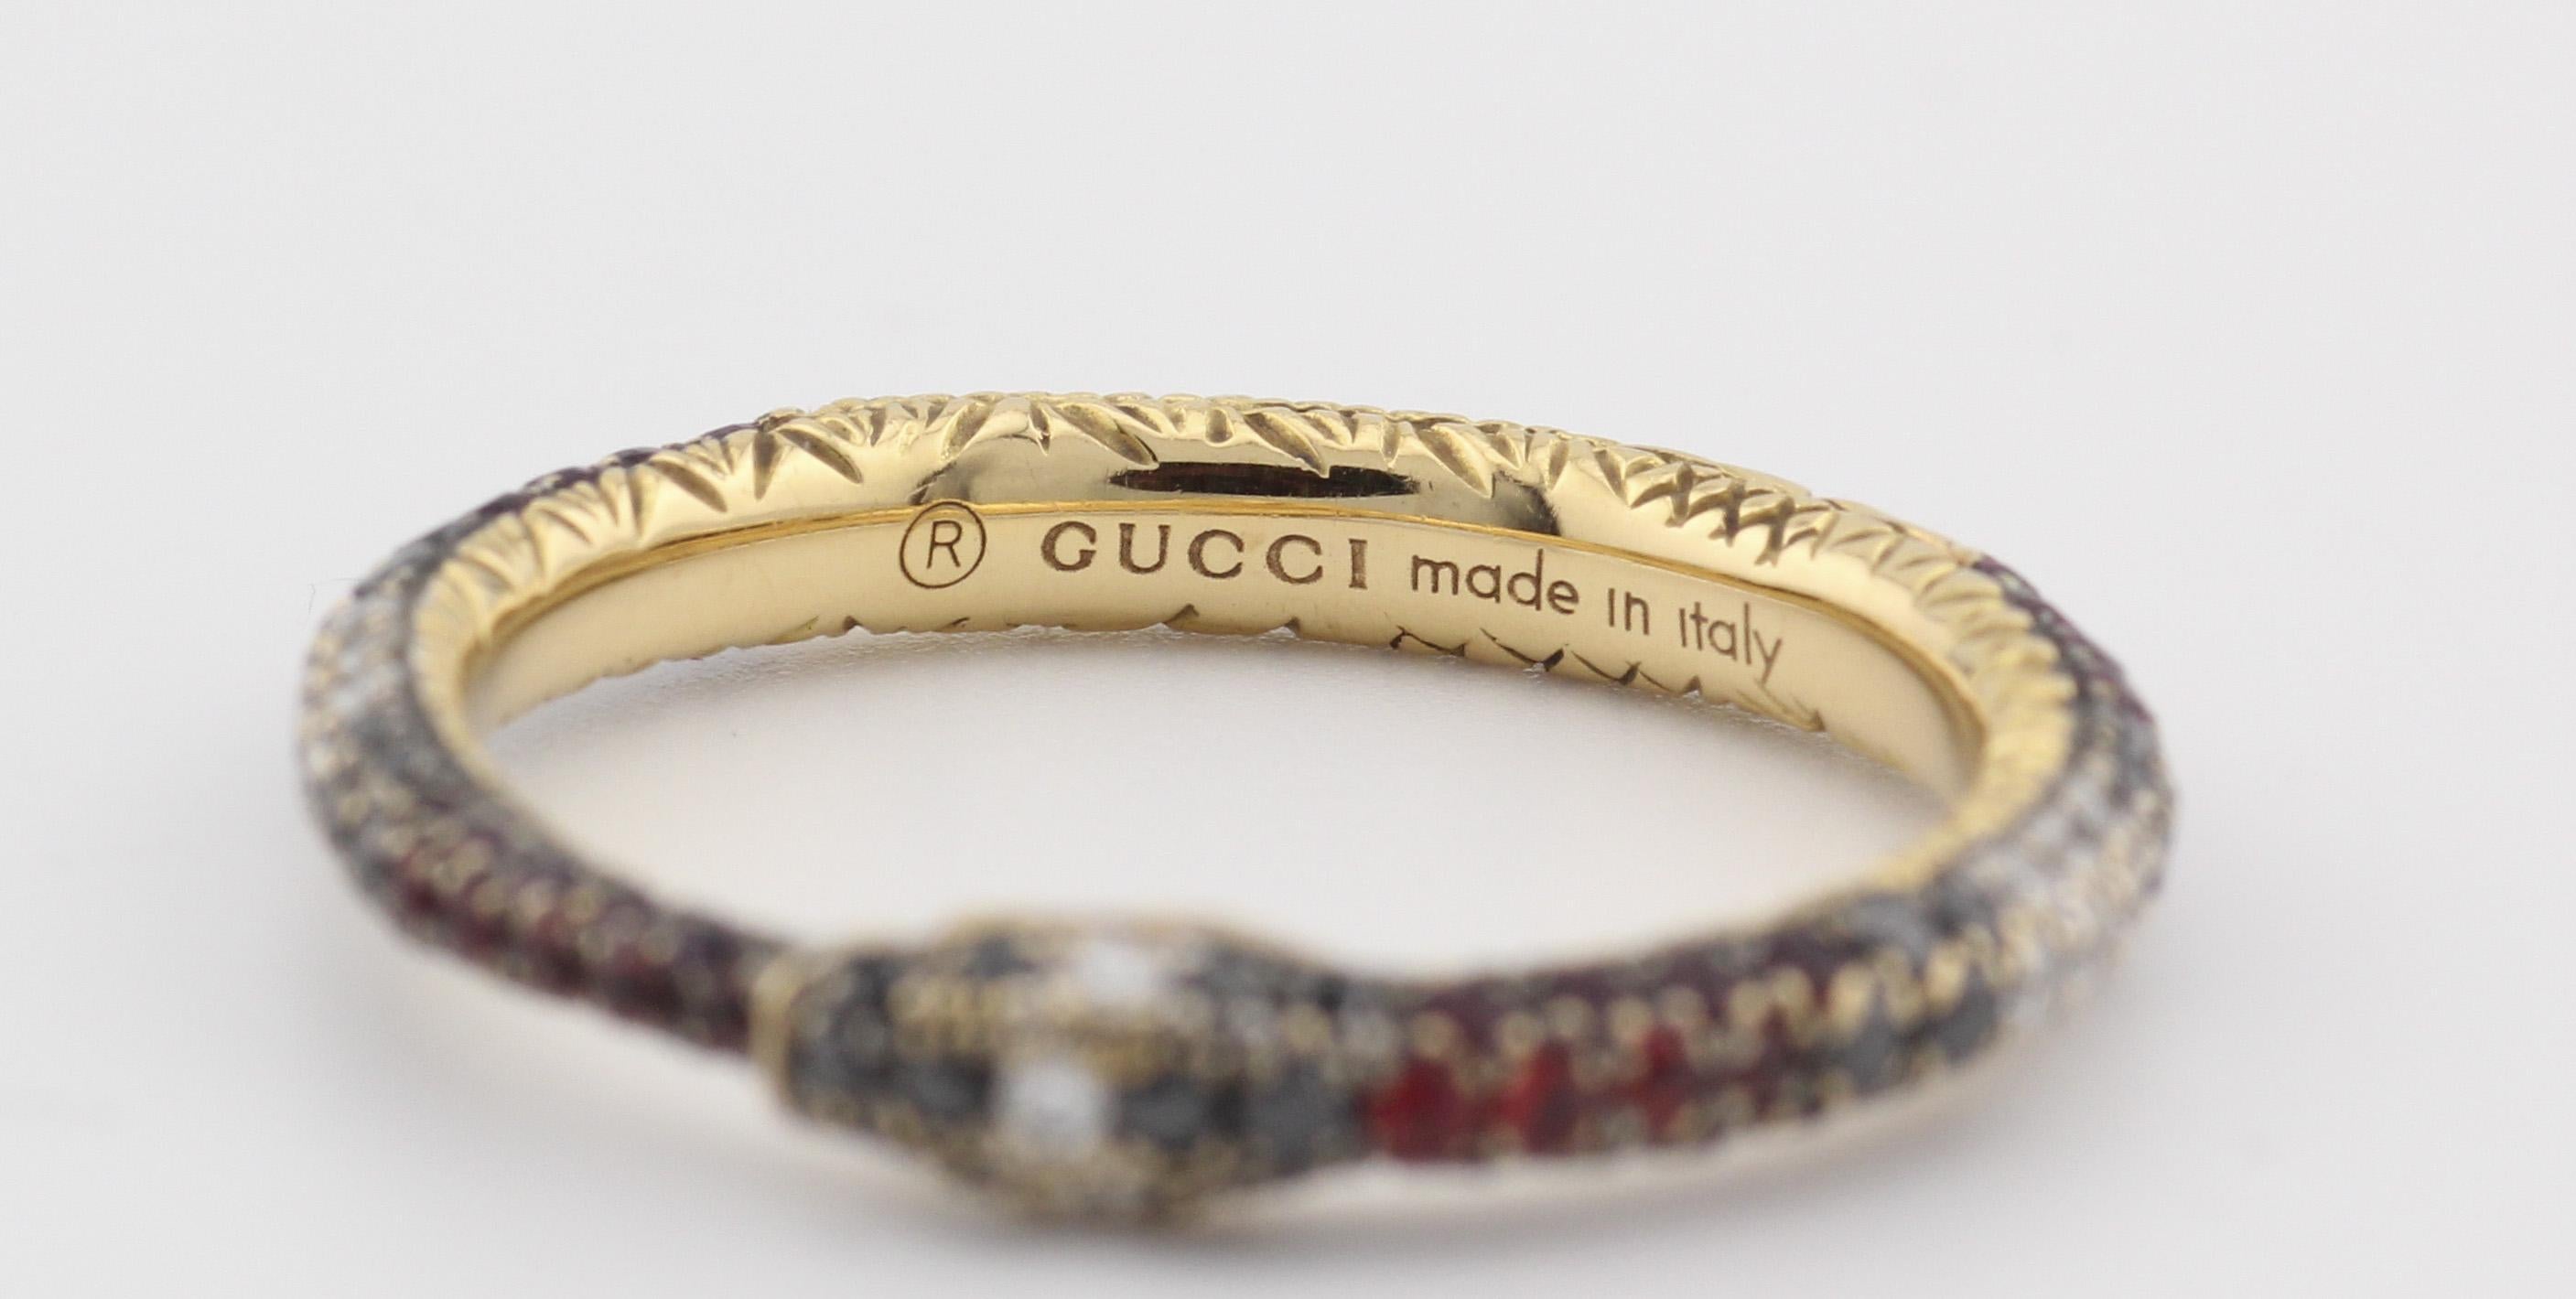 Gucci Ouroboros Gemstone 18K Yellow Gold Kingsnake Band Ring Size 5 For Sale 1